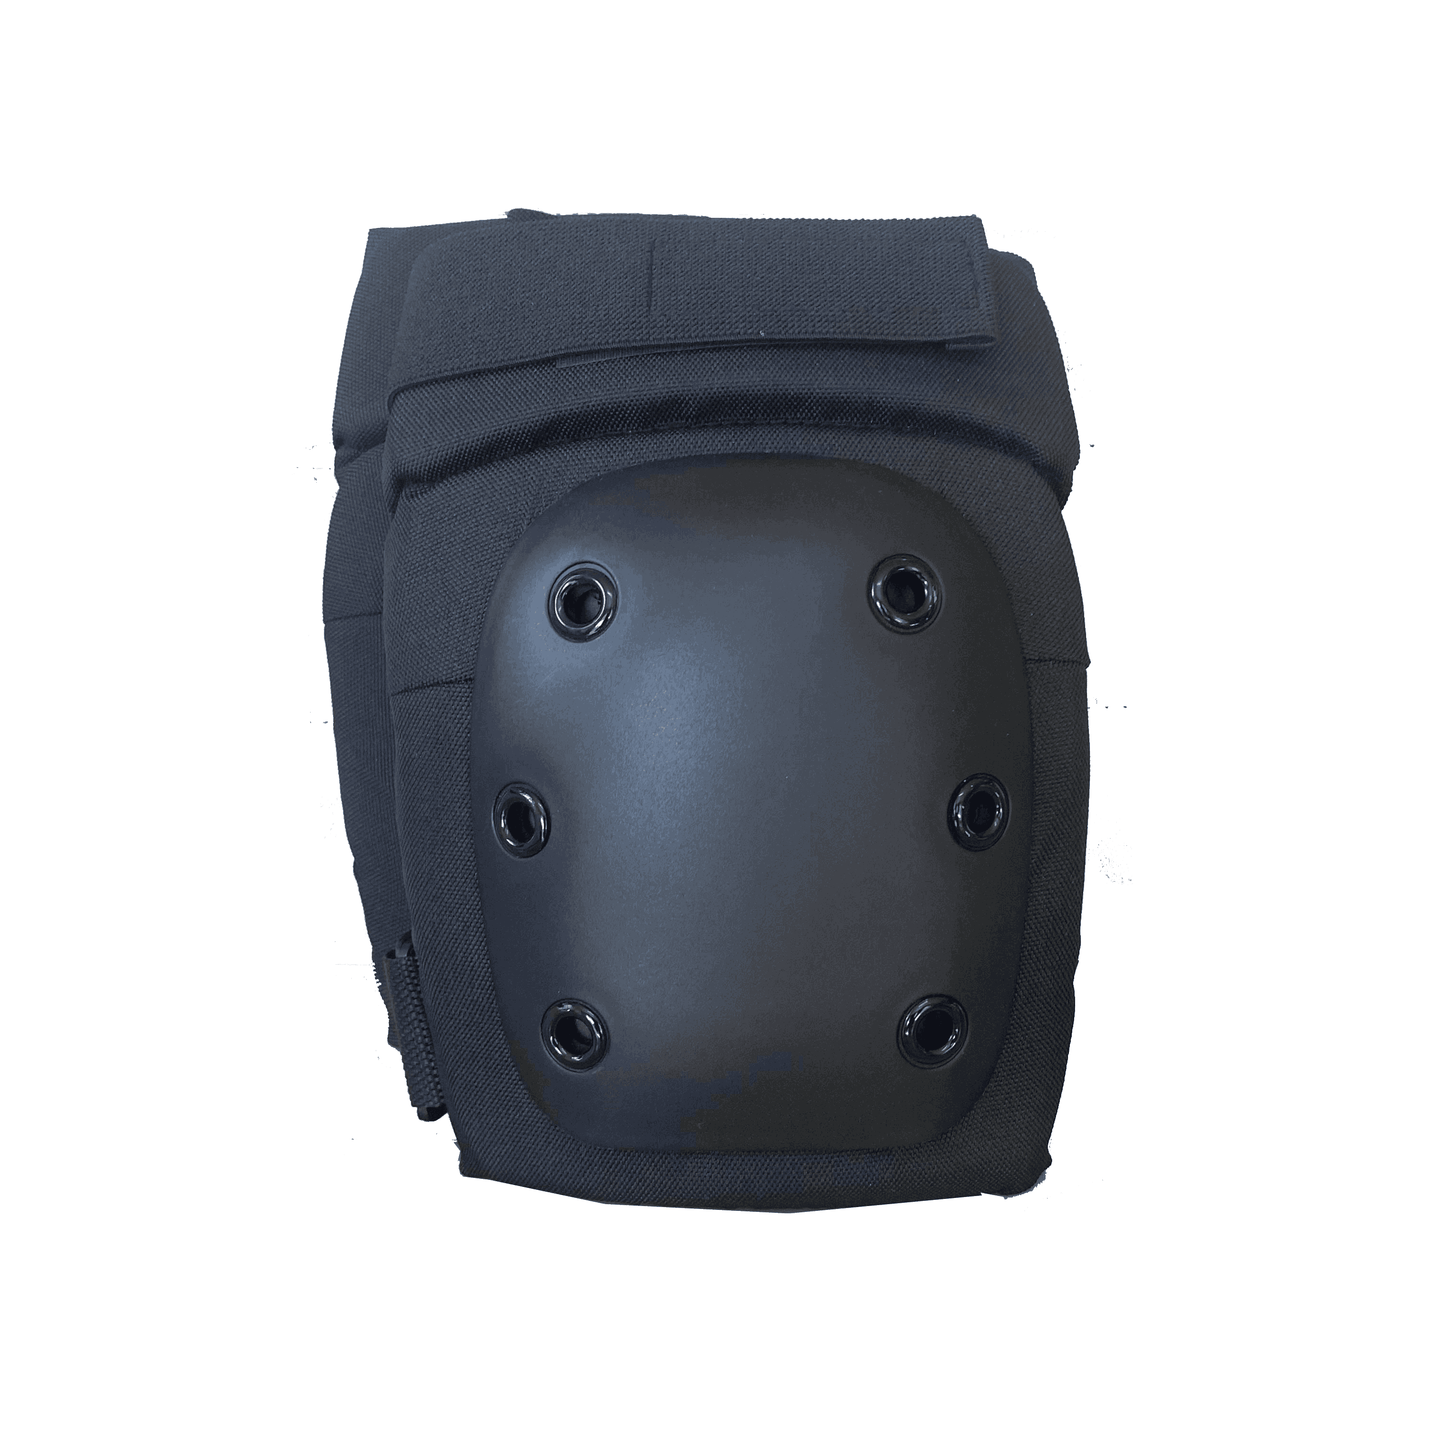 Entry-tier Knee Pads